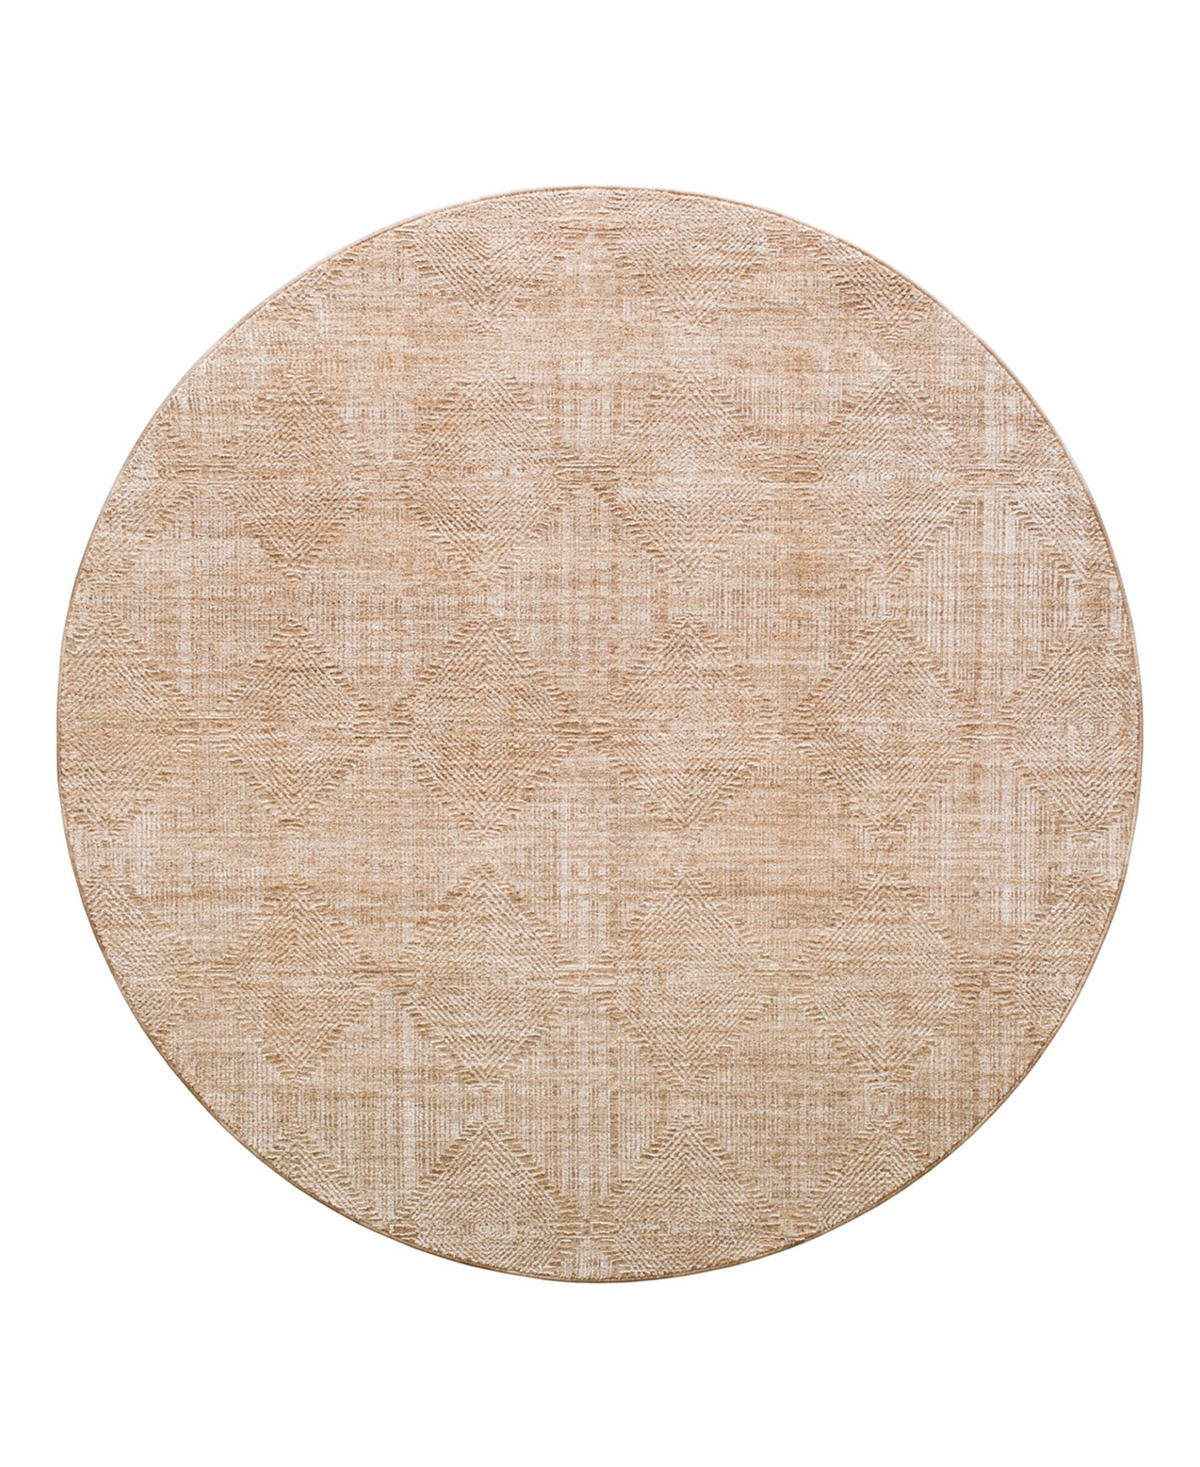 Surya Masterpiece High-Low Mpc-2312 6'7in x 6'7in Round Area Rug - Tan